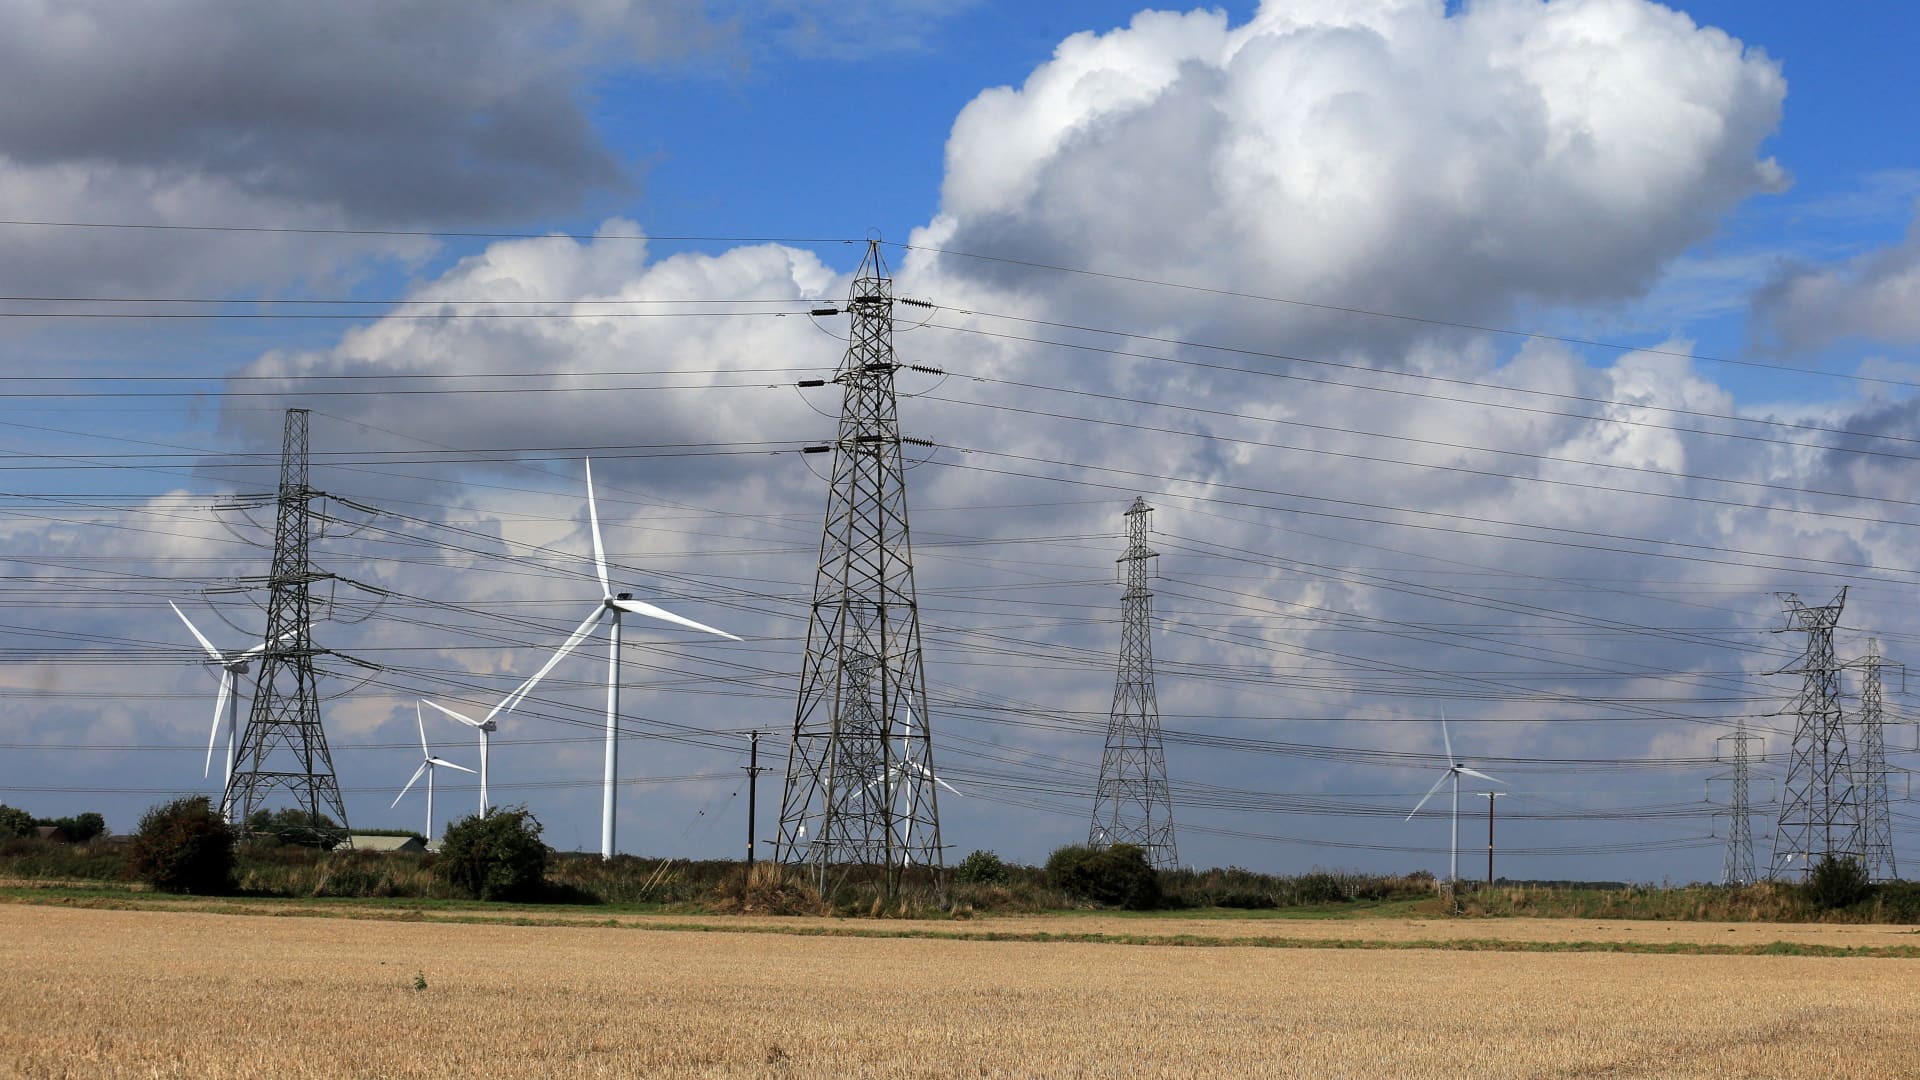 Power firm SSE says backing renewables can help get Britain closer to energy self-reliance